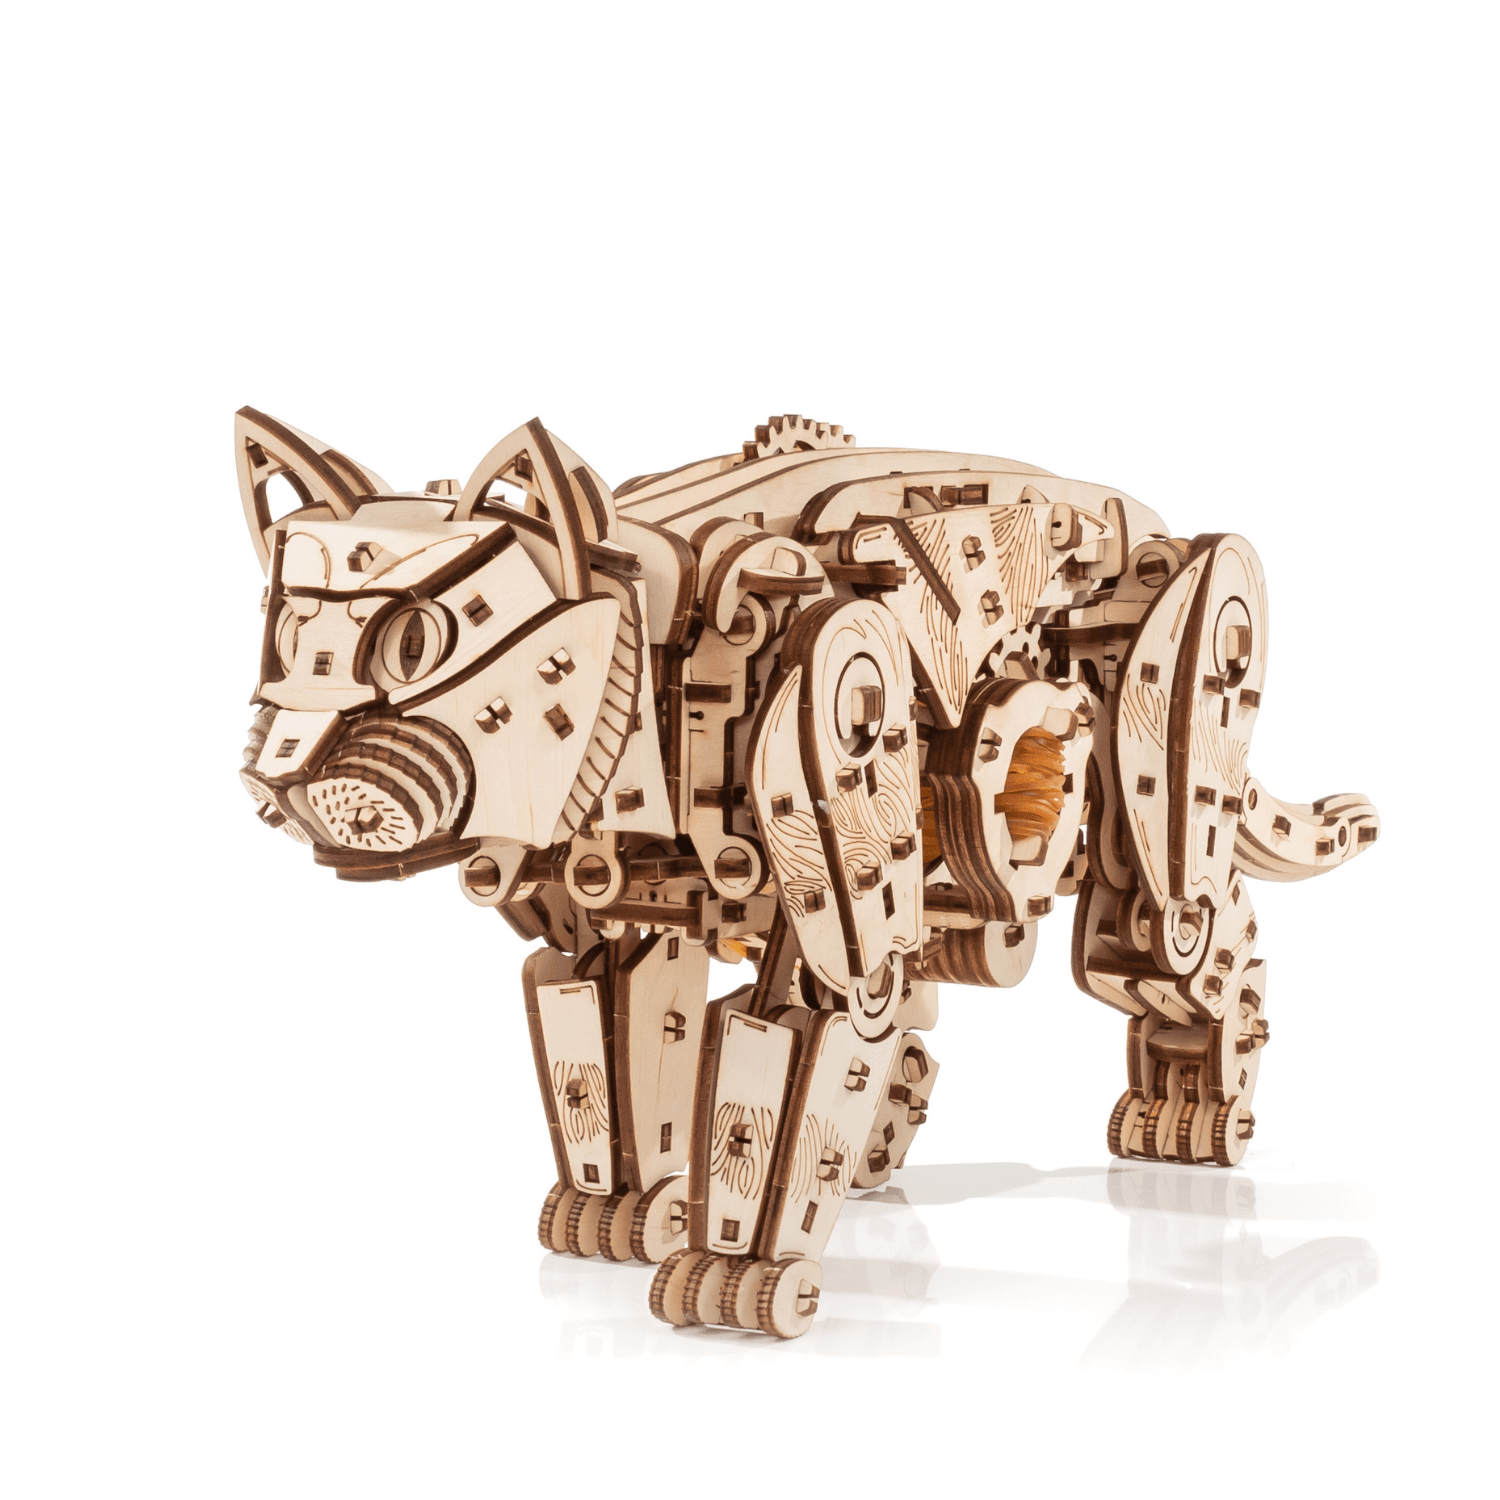 Mechanical Cats | White or Black-Mechanical Wooden Puzzle-Eco-Wood-Art-wild-cat-ewa-4815123002604